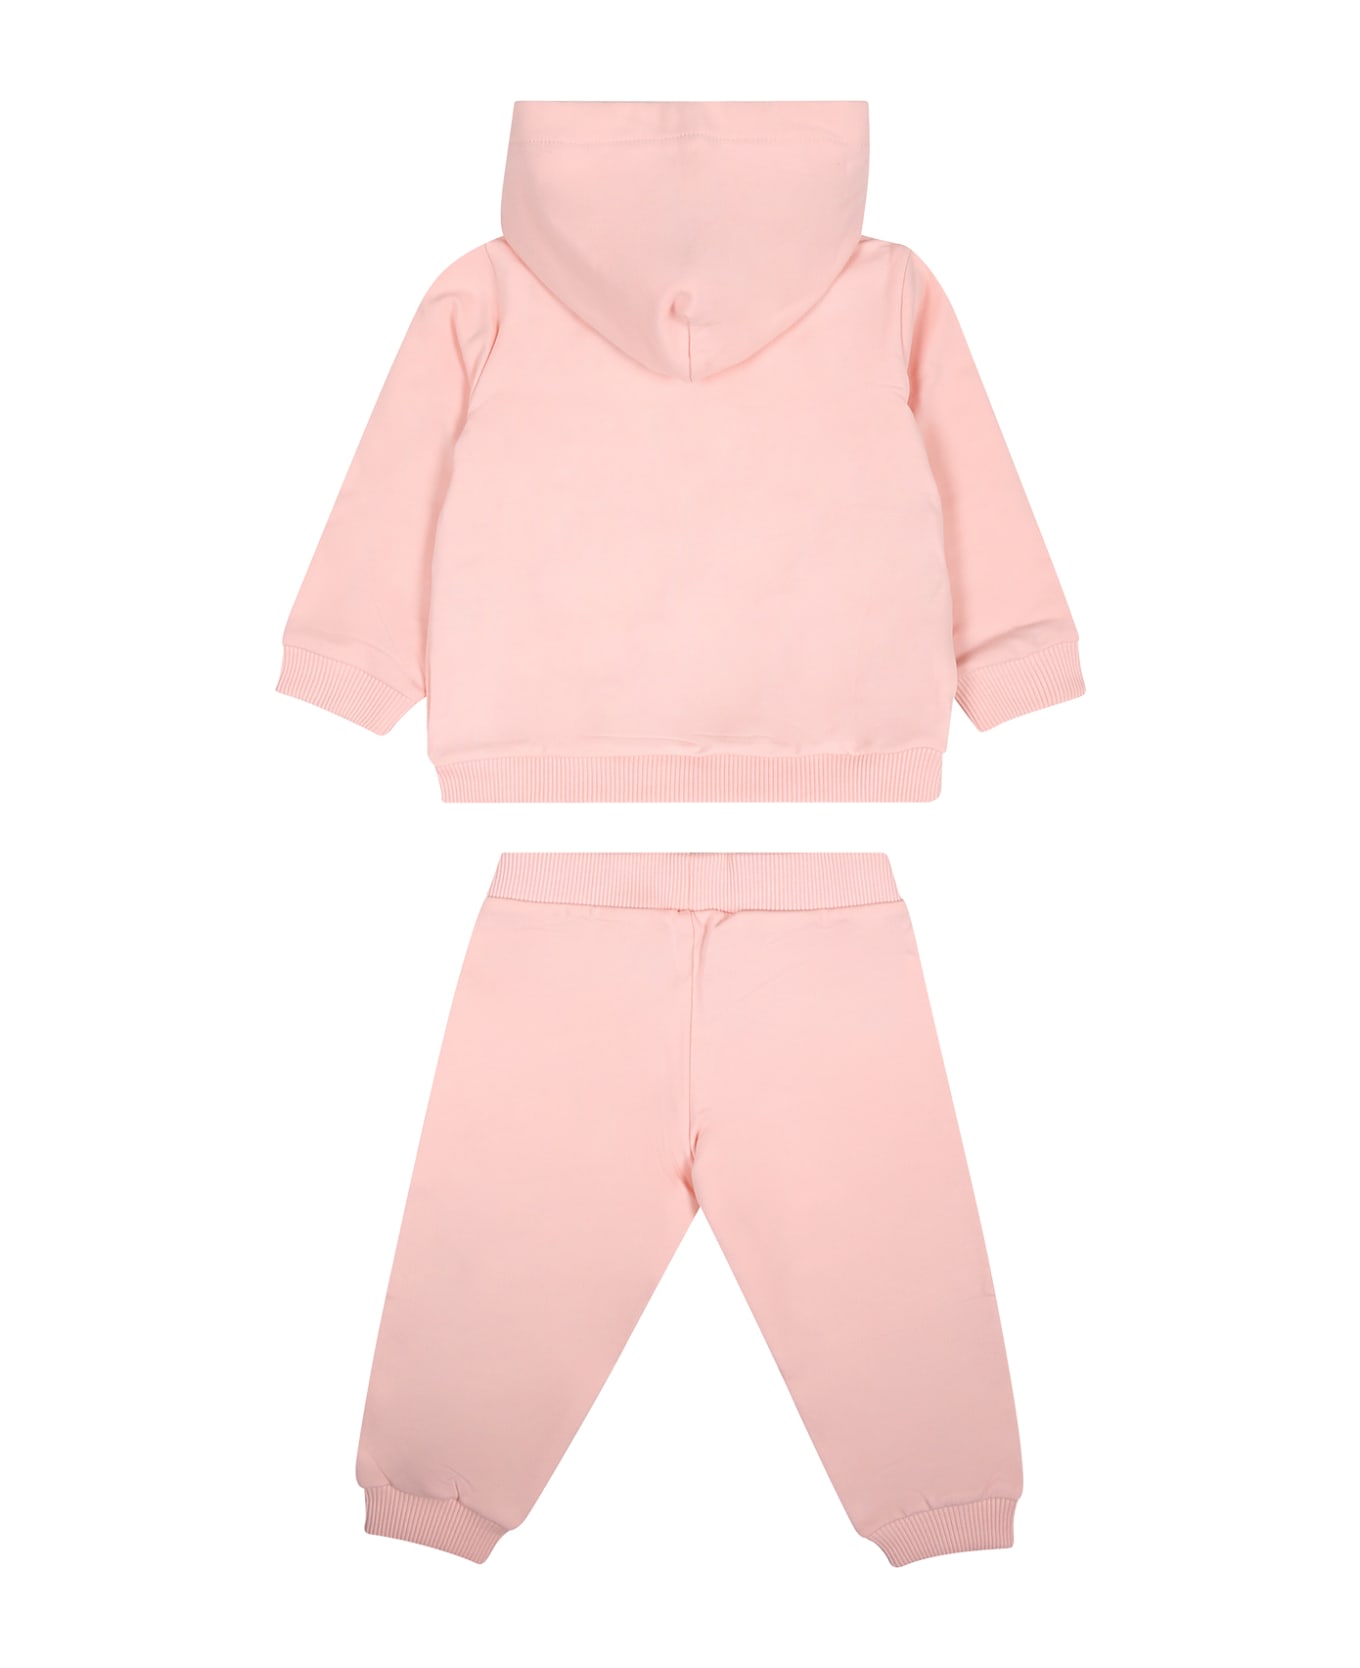 Moschino Pink Set For Baby Girl With Teddy Bear And Logo - Pink ボトムス